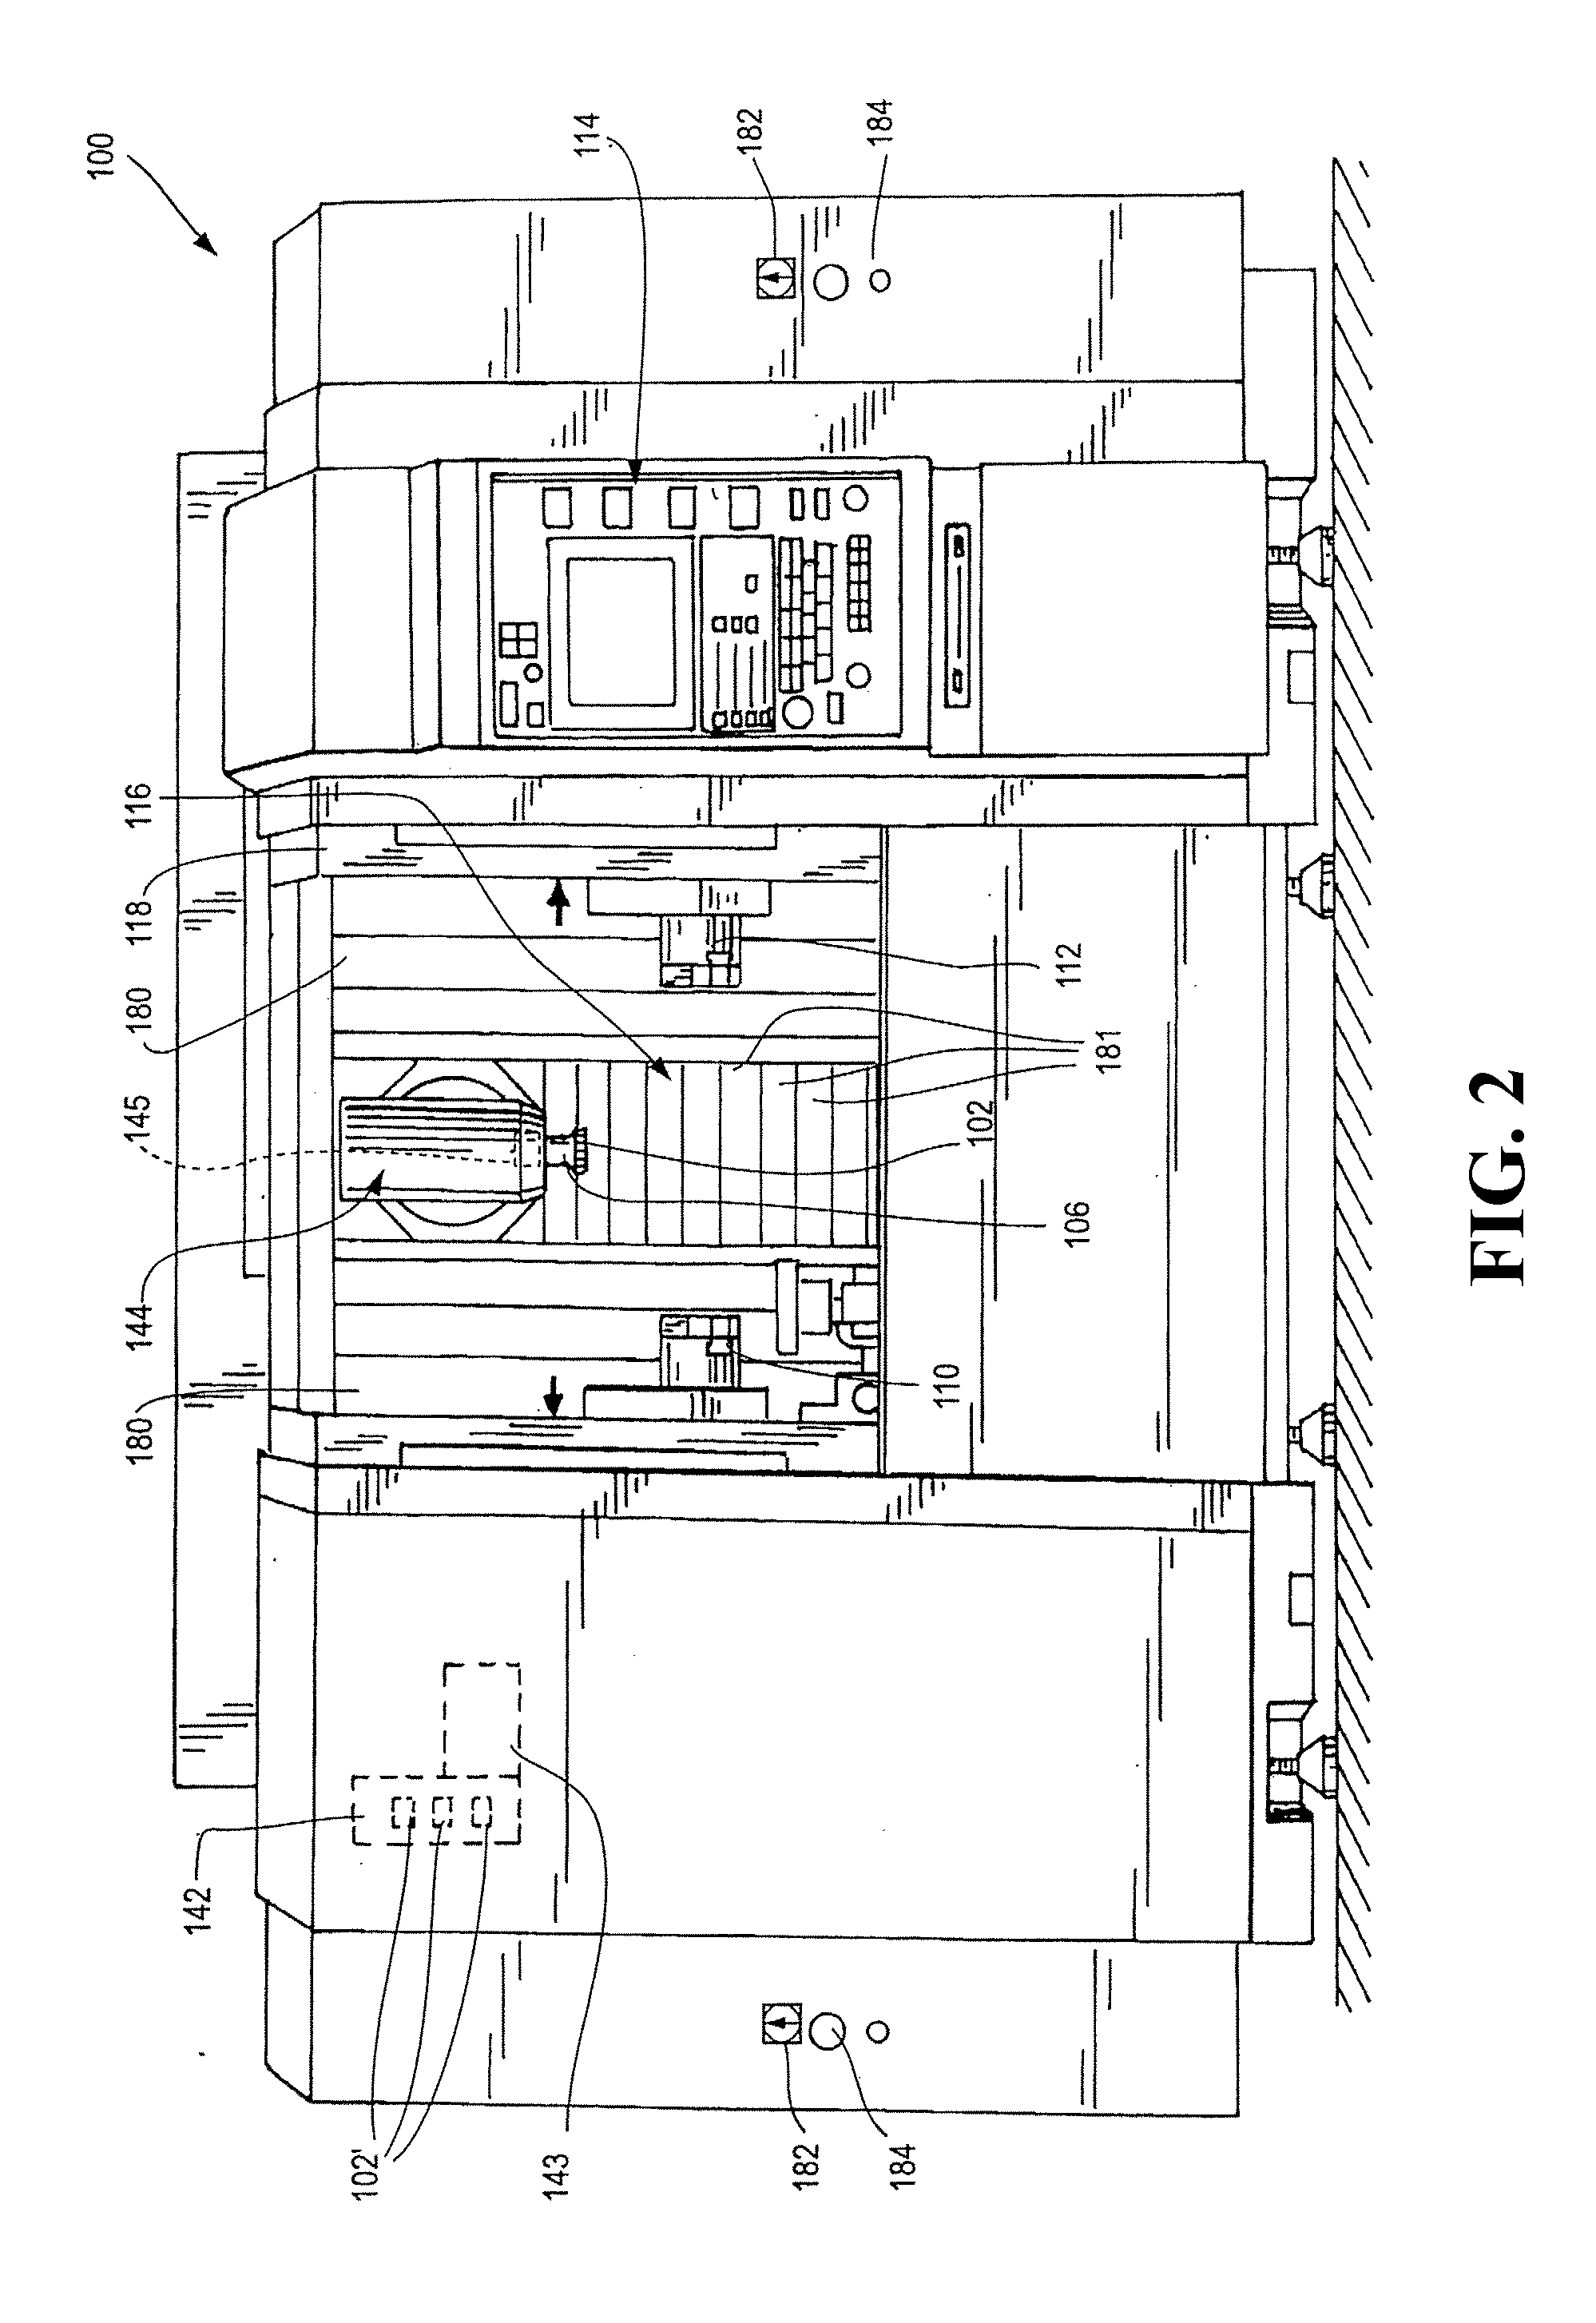 Grind Hardening Method and Apparatus